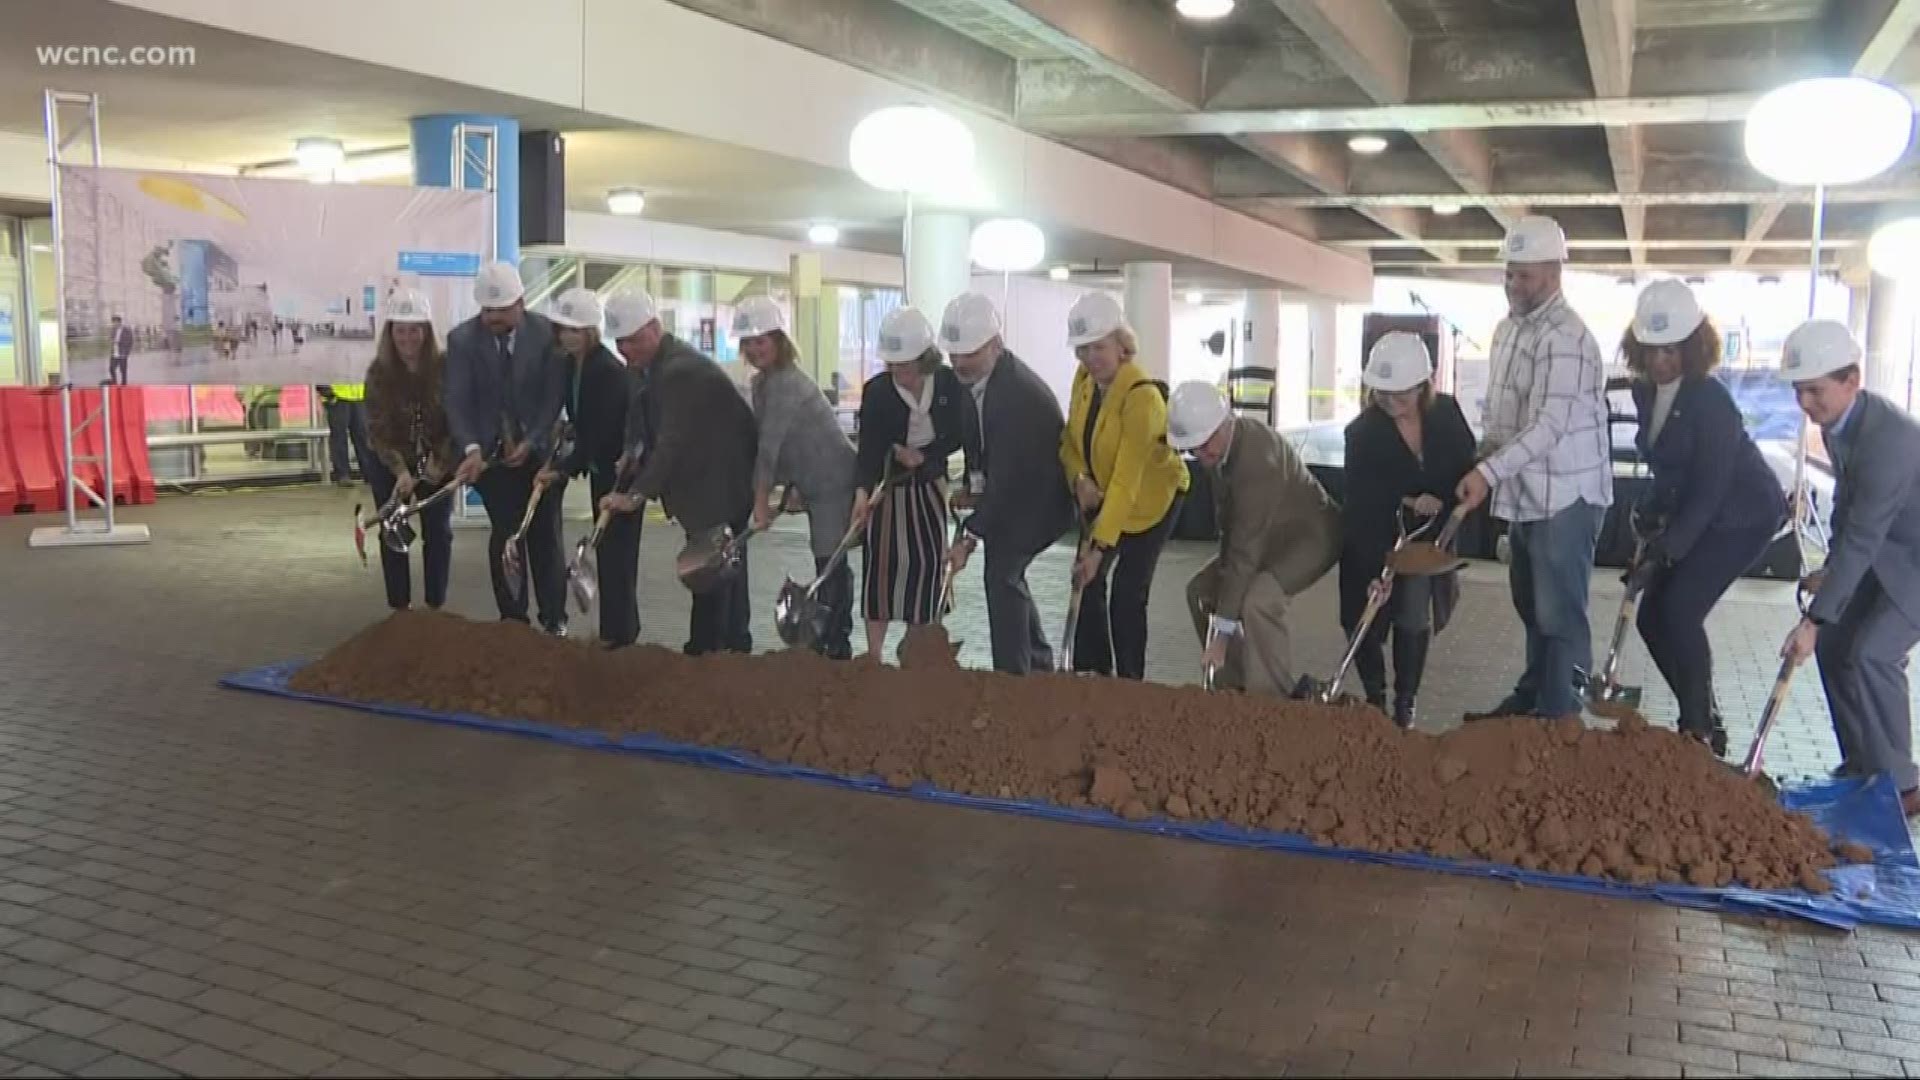 Just in time for the second wave of holiday travel, airport officials broke ground on the lobby expansion. It's a $600 million project.